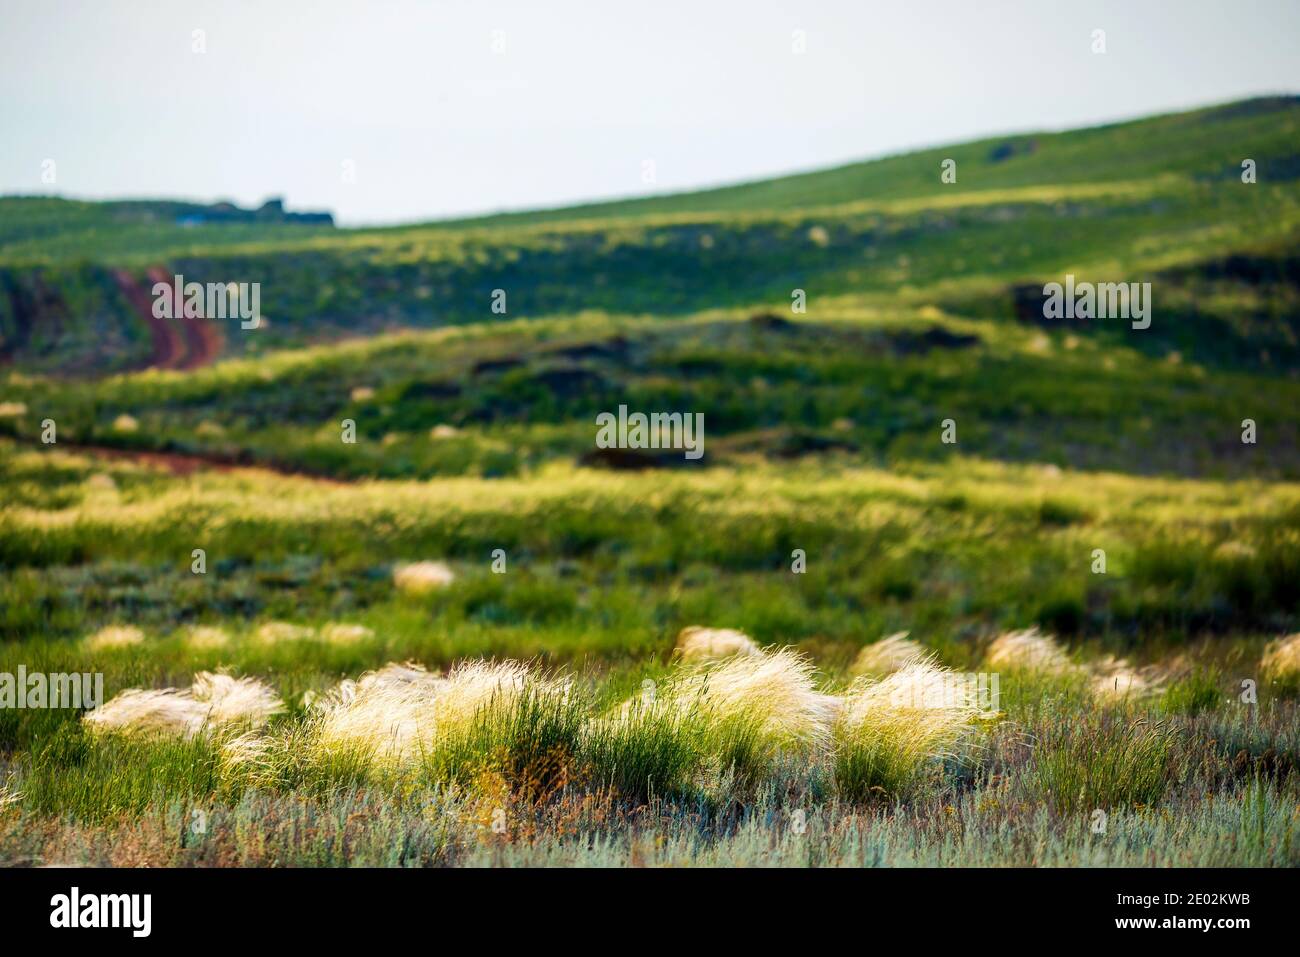 Blooming feather grass, fluttering in the wind on the plain between the hills. Stock Photo